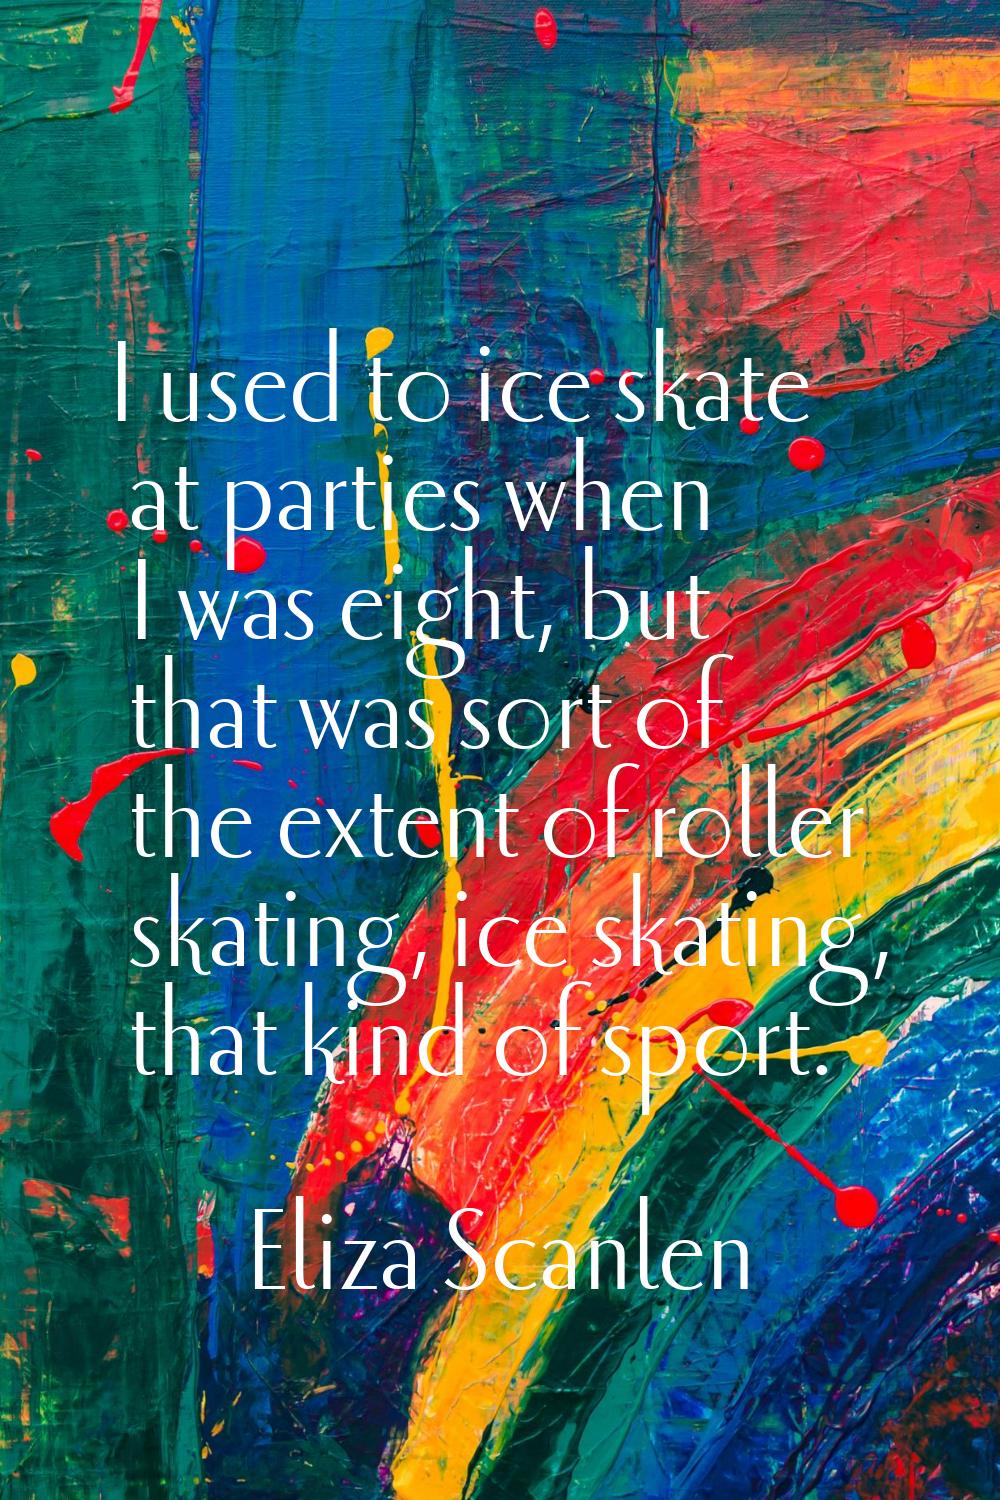 I used to ice skate at parties when I was eight, but that was sort of the extent of roller skating,